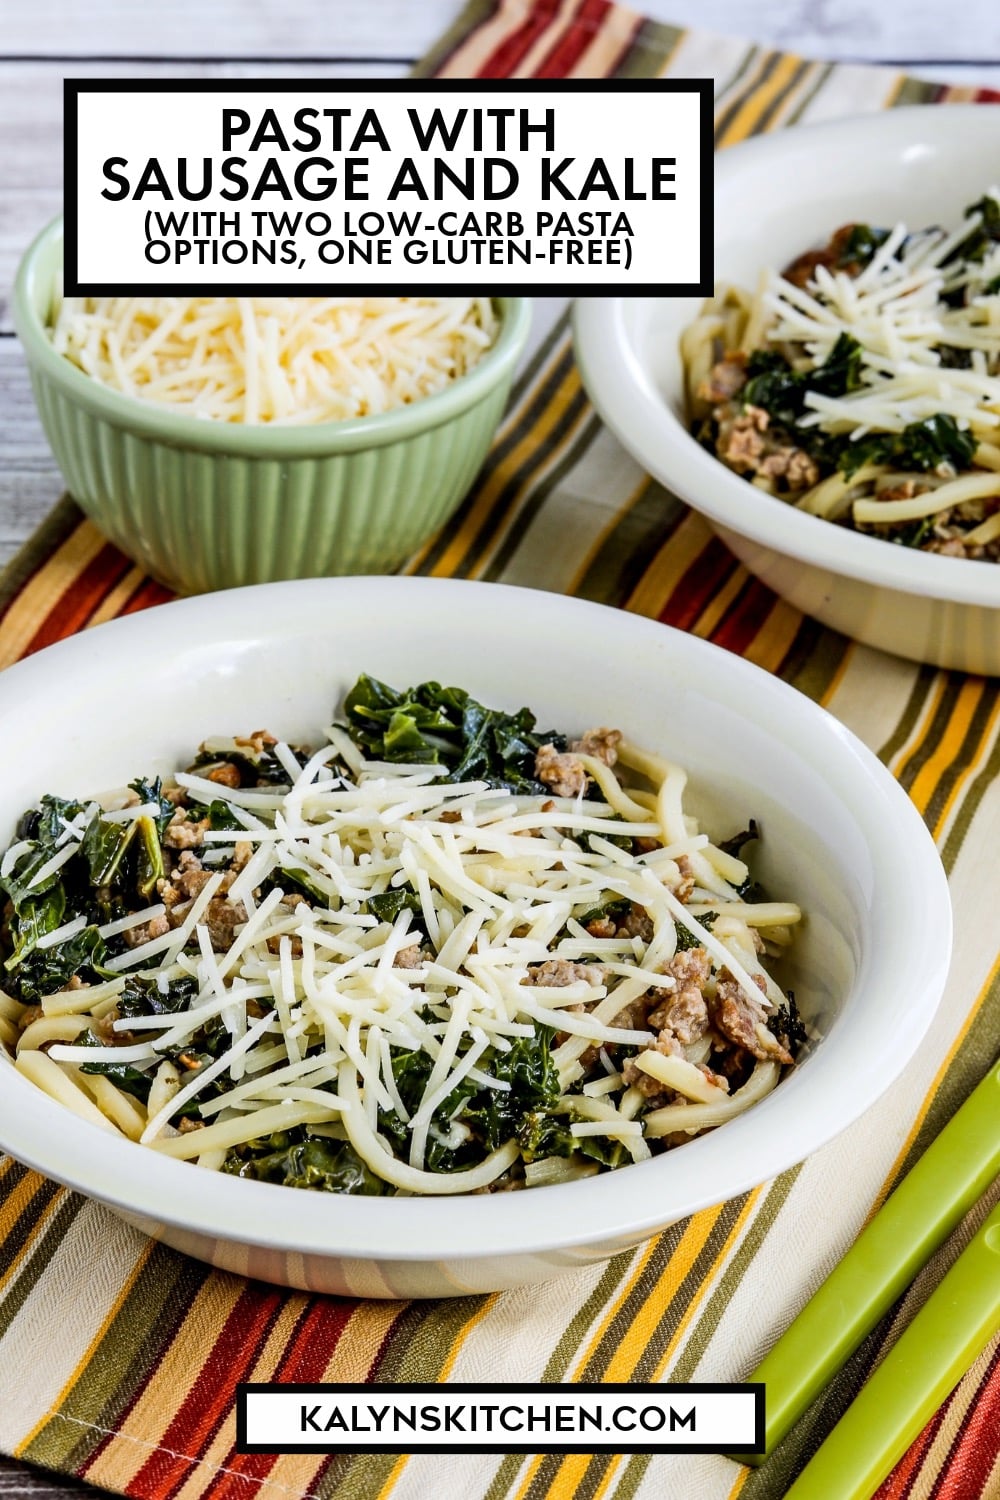 Pinterest image of Pasta with Sausage and Kale